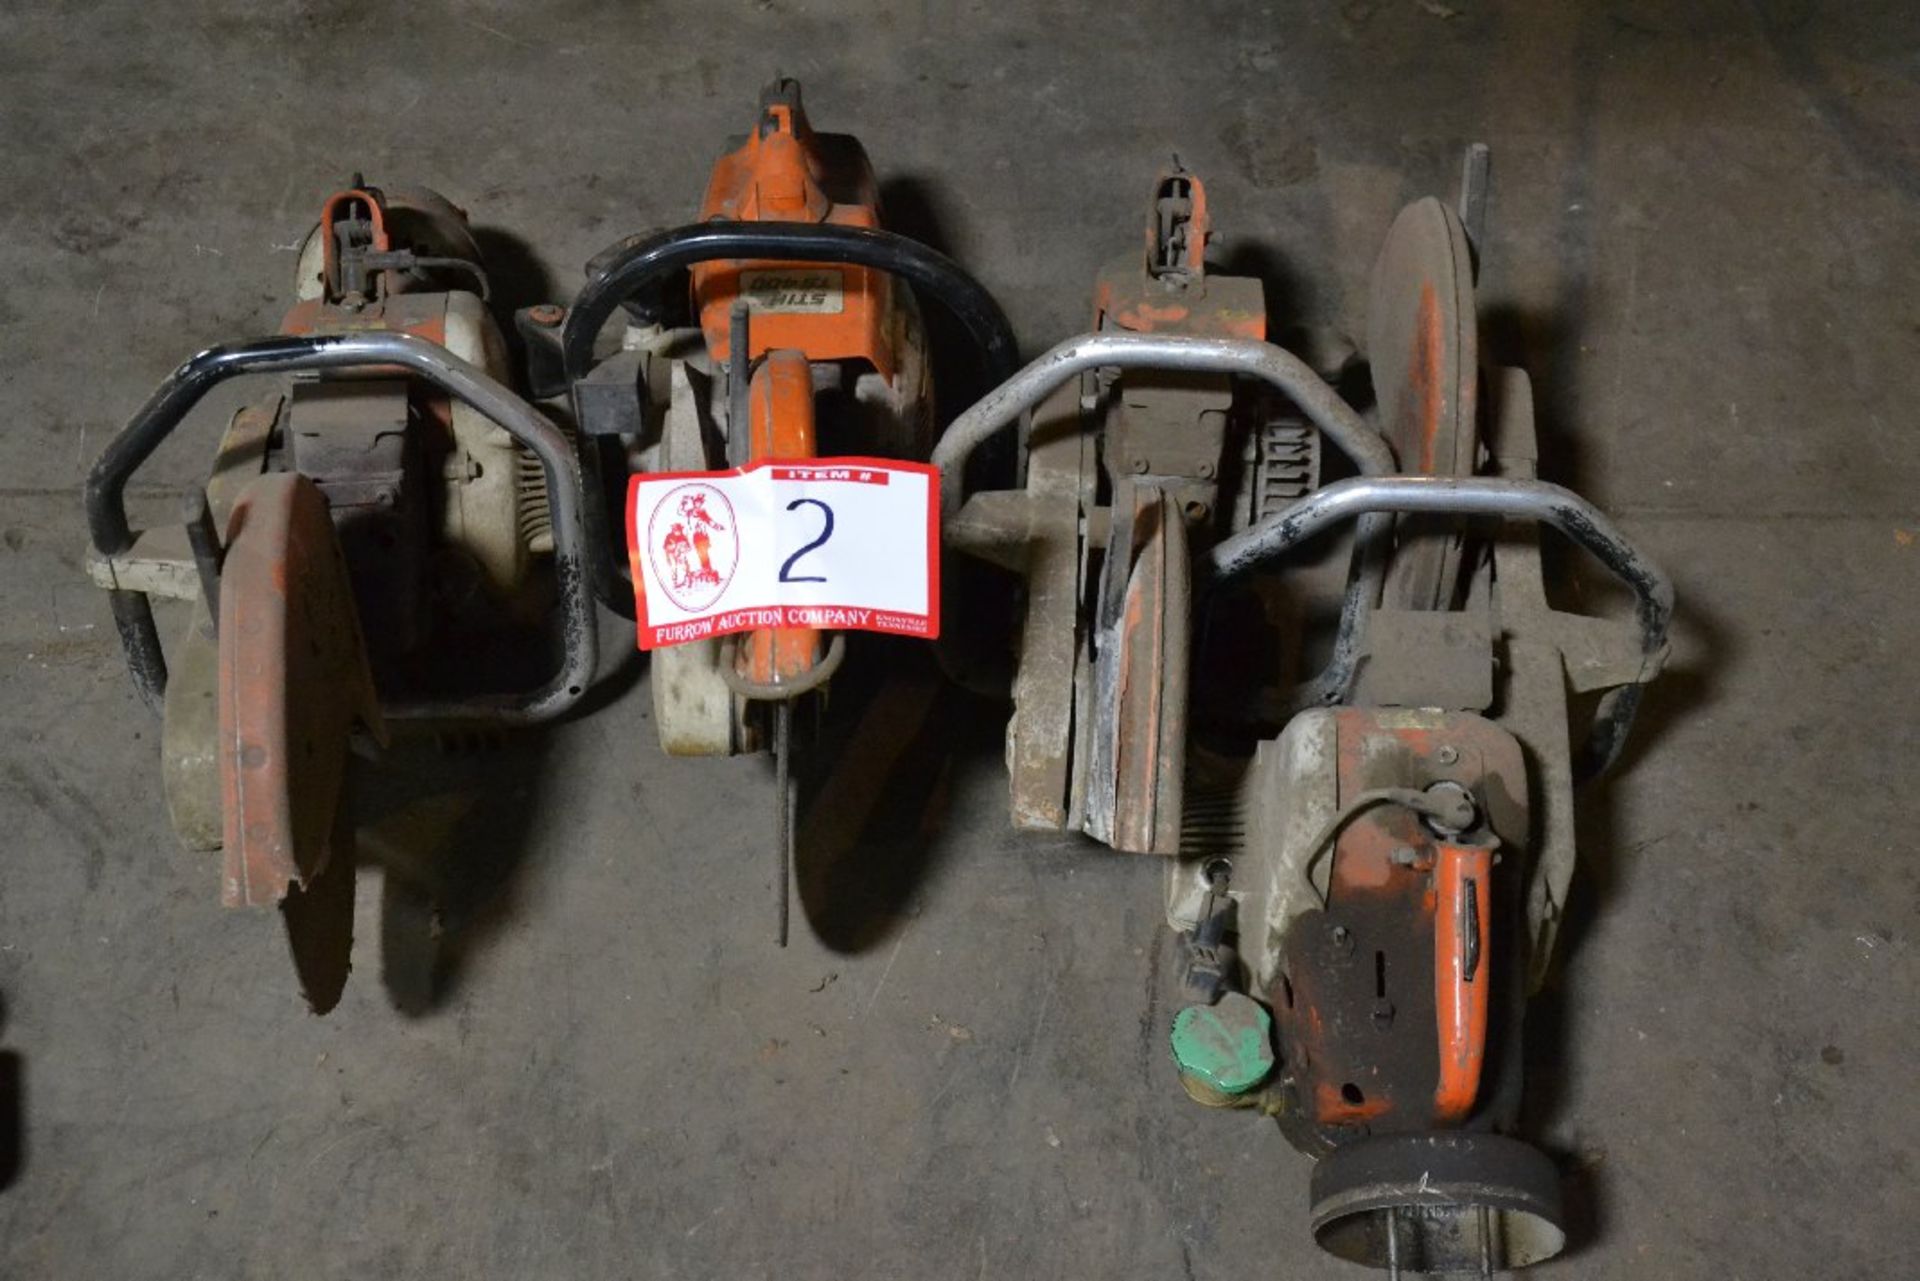 4 Stihl concrete saws ( 1 TS 350, 1 TS 400, and 2 additional Stihl saws for Parts Only)